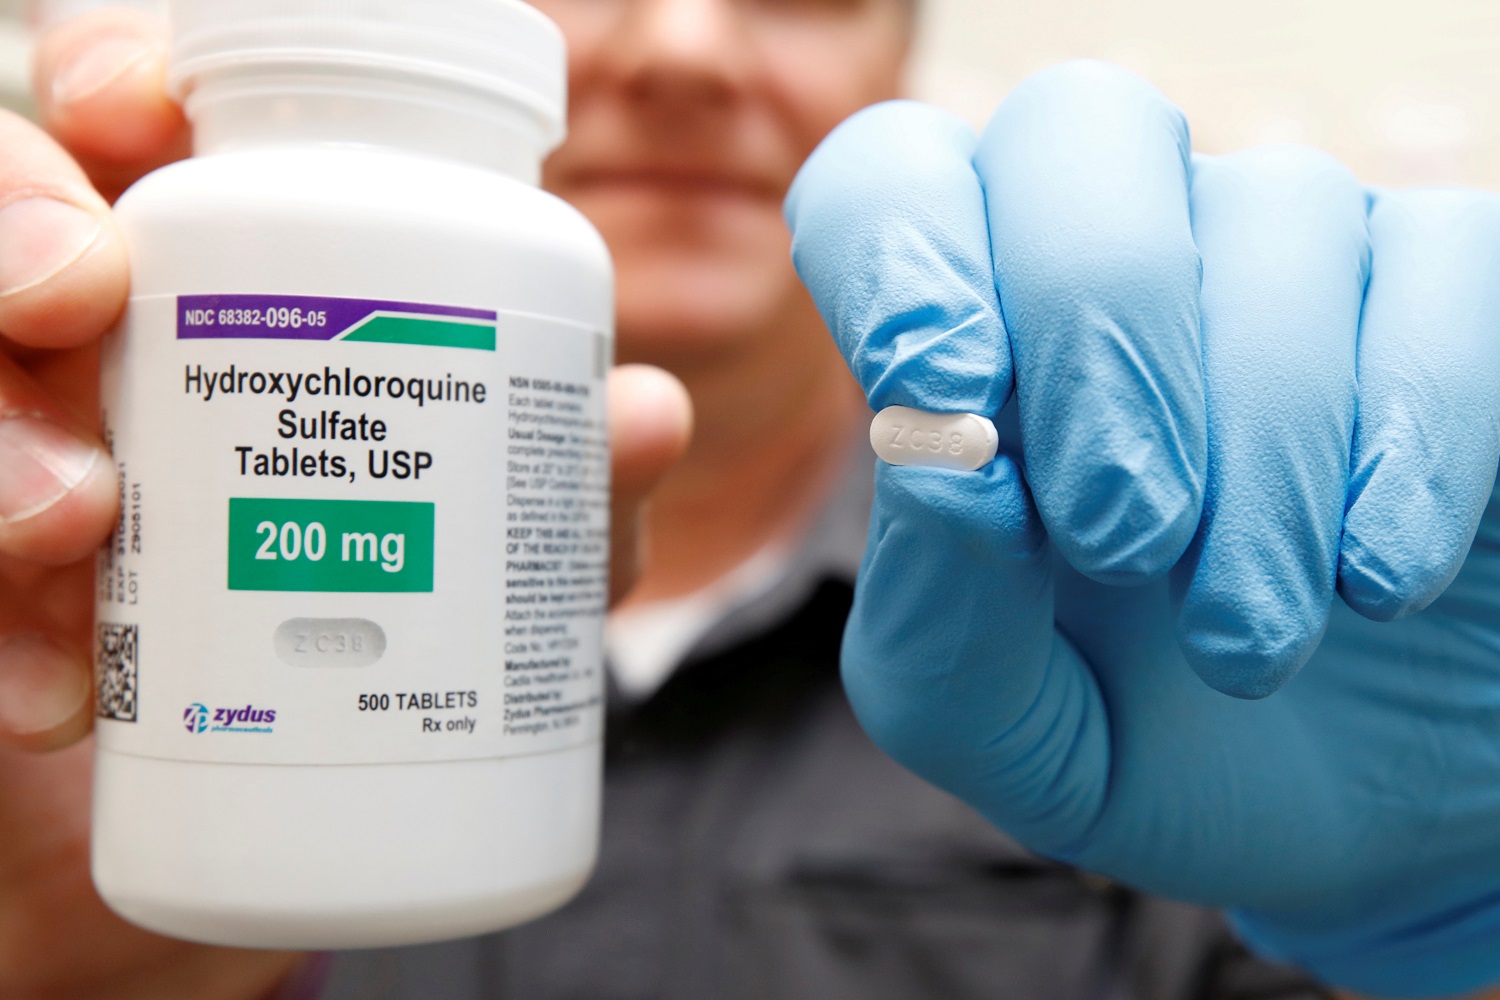 The drug hydroxychloroquine, pushed by U.S. President Donald Trump and others in recent months as a possible treatment to people infected with the coronavirus disease (COVID-19), is displayed by a pharmacist in Provo